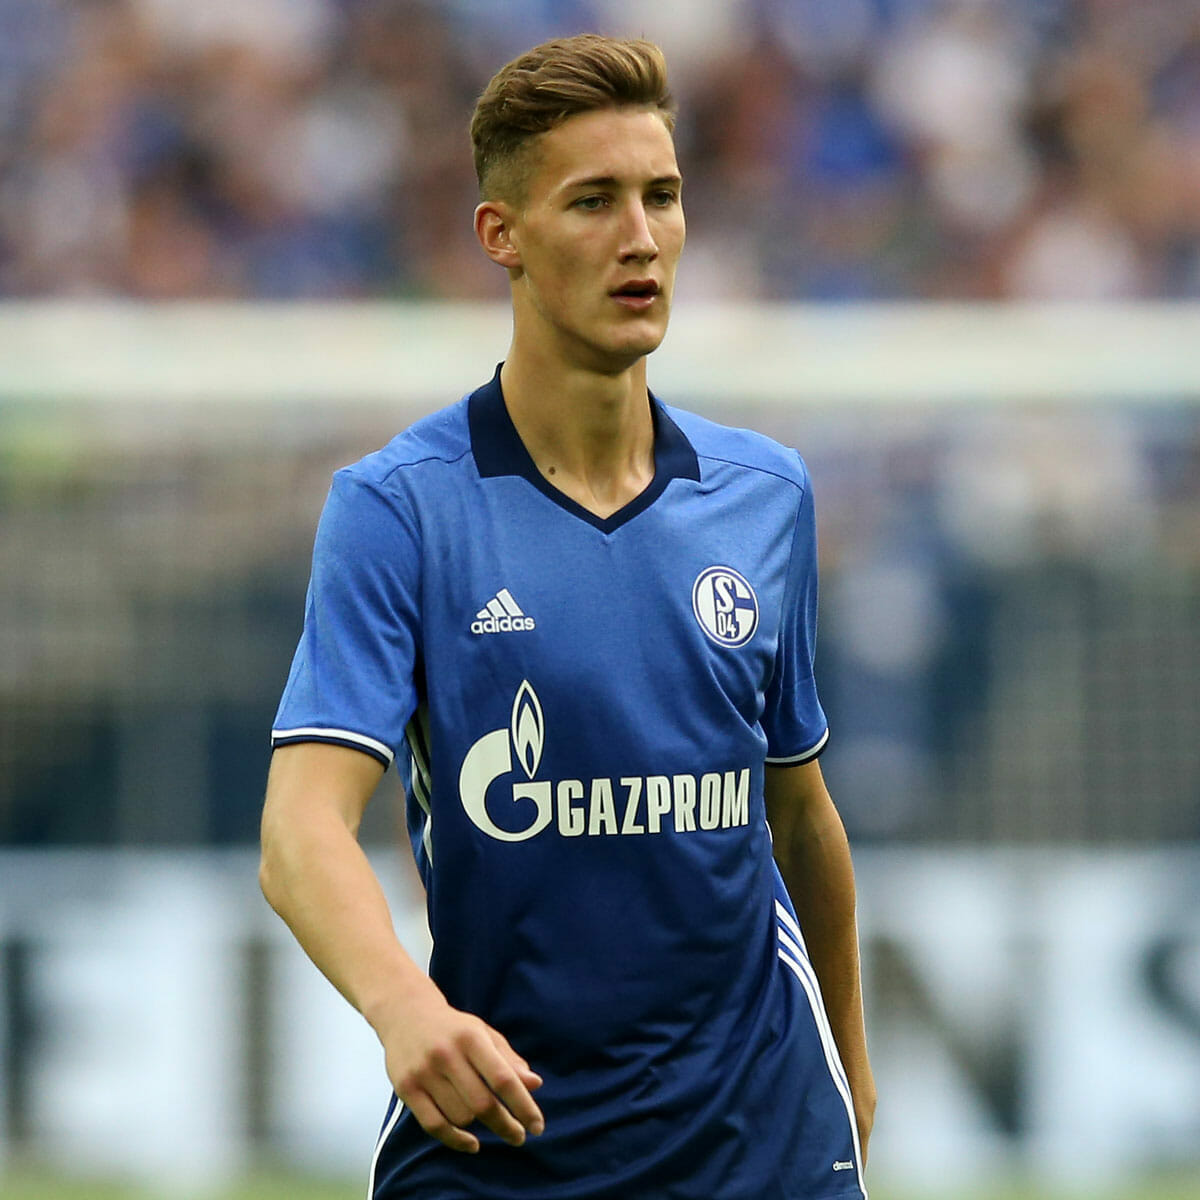 Transitioning to the first team - FC Schalke 04